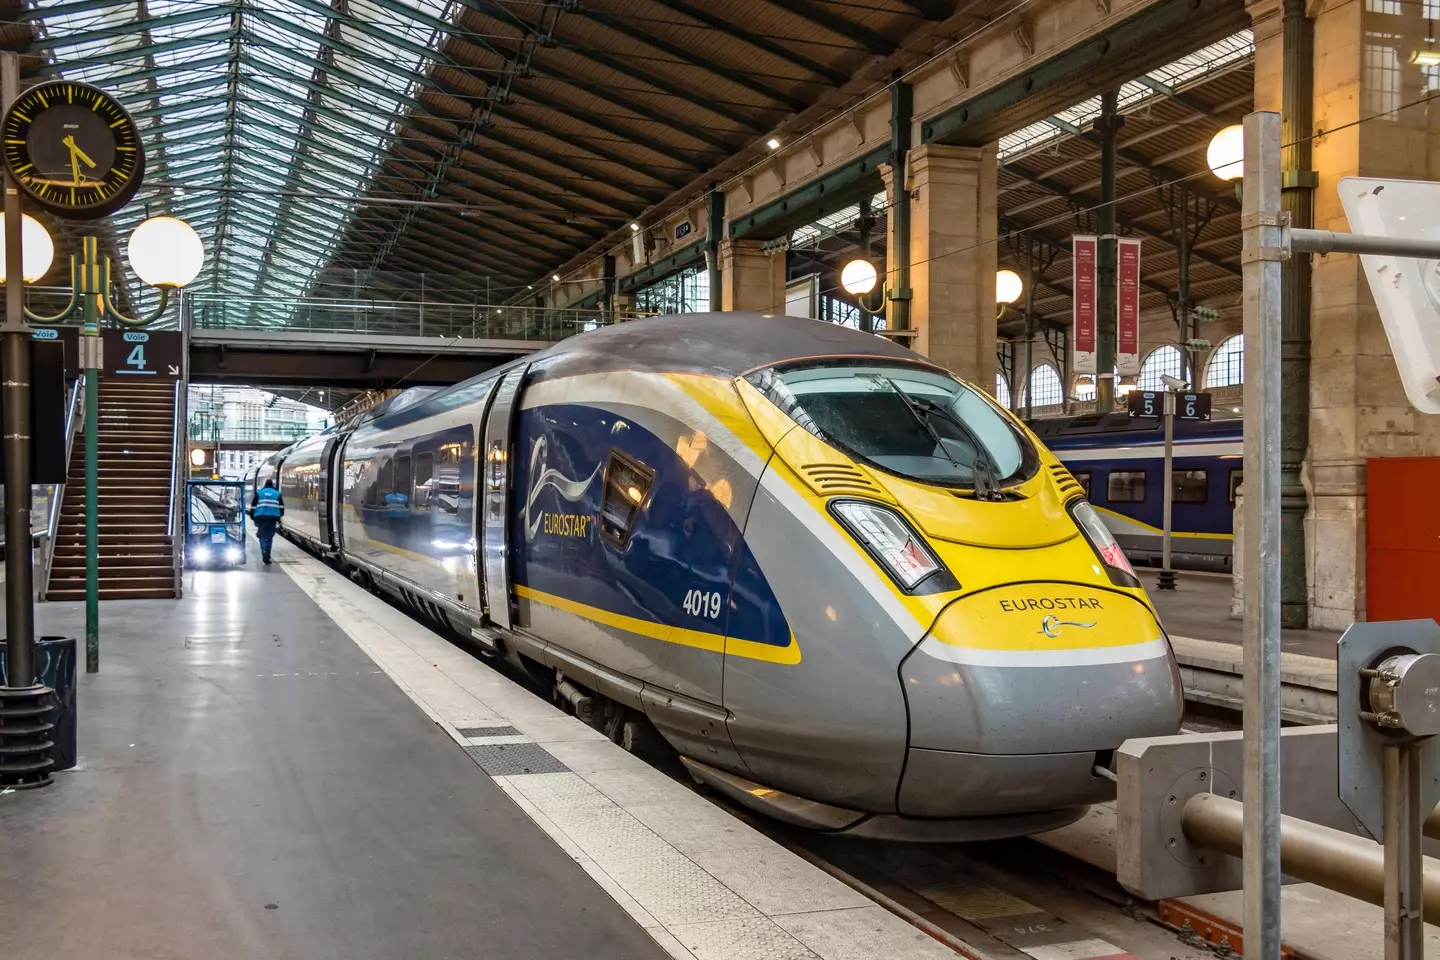 With Eurostar's discounted tickets you can go to destinations such as Paris, Brussels, Lille, Rotterdam or Amsterdam.